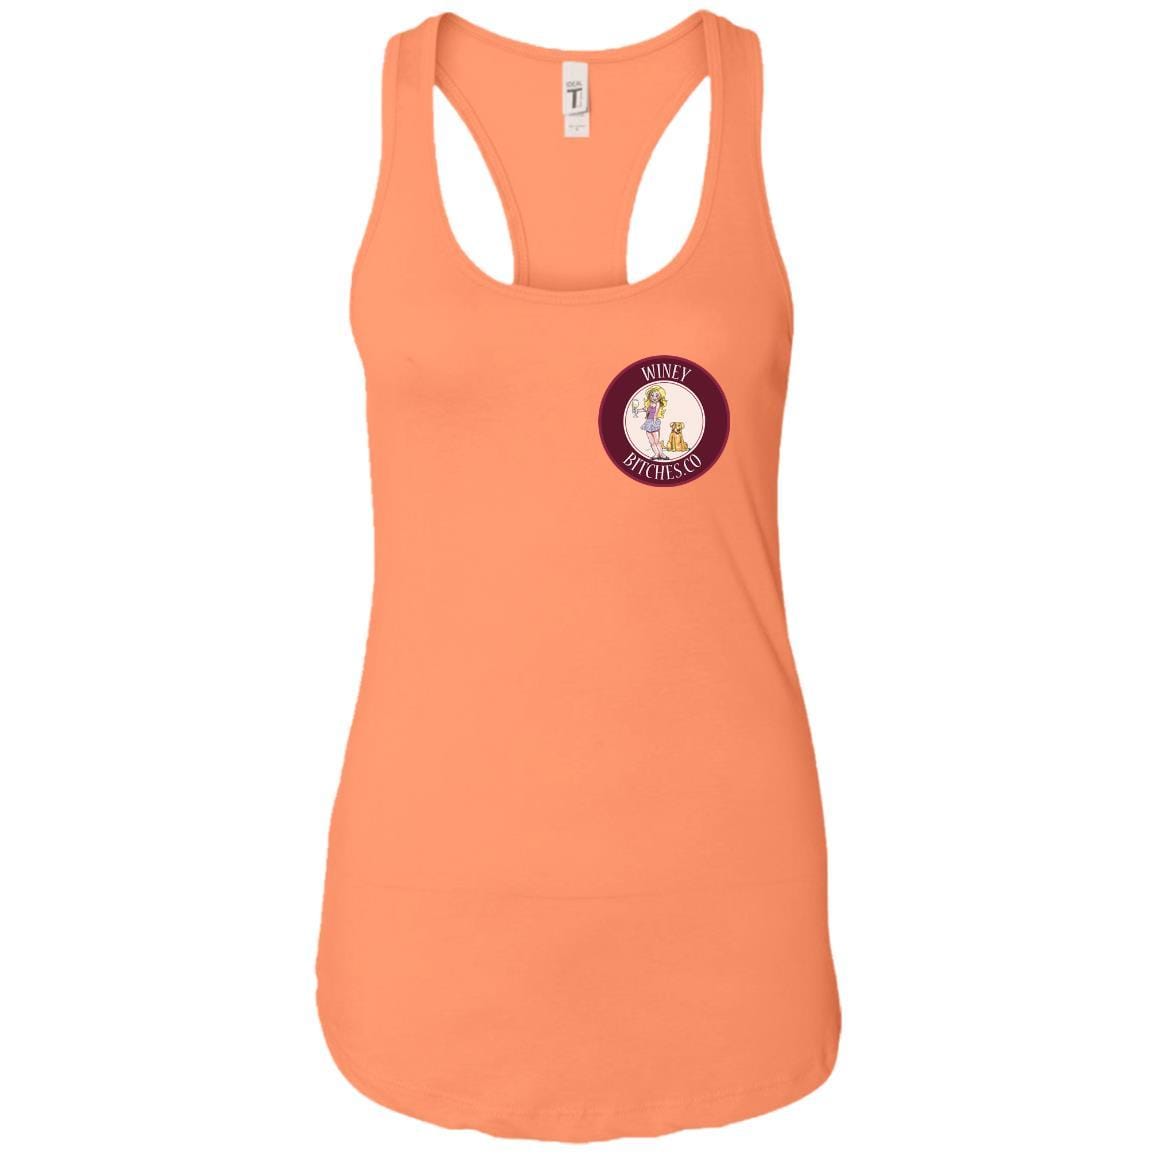 T-Shirts Light Orange / X-Small WineyBitches.co Hilariously Funny Tank Top for Wine & Dog Lovers WineyBitchesCo